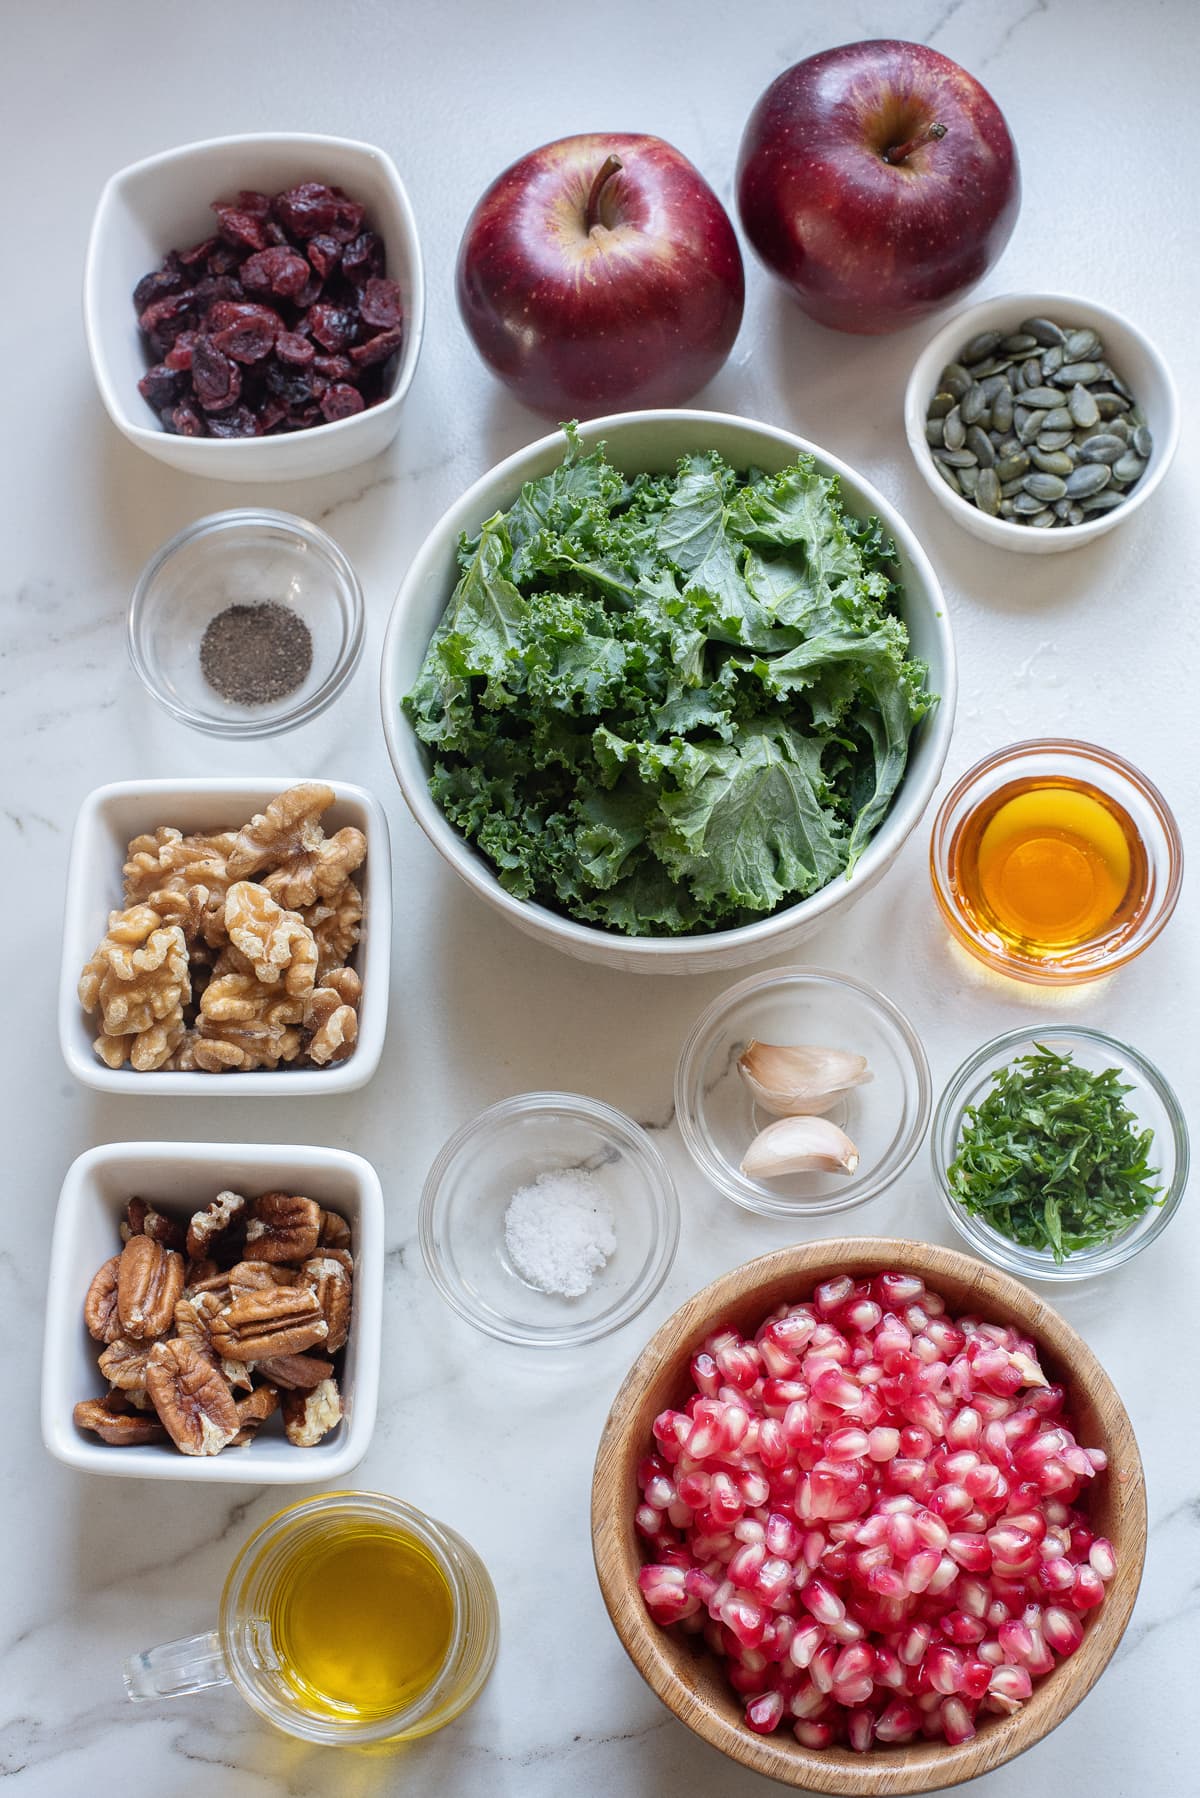 Ingredients for a Pomegranate Salad.